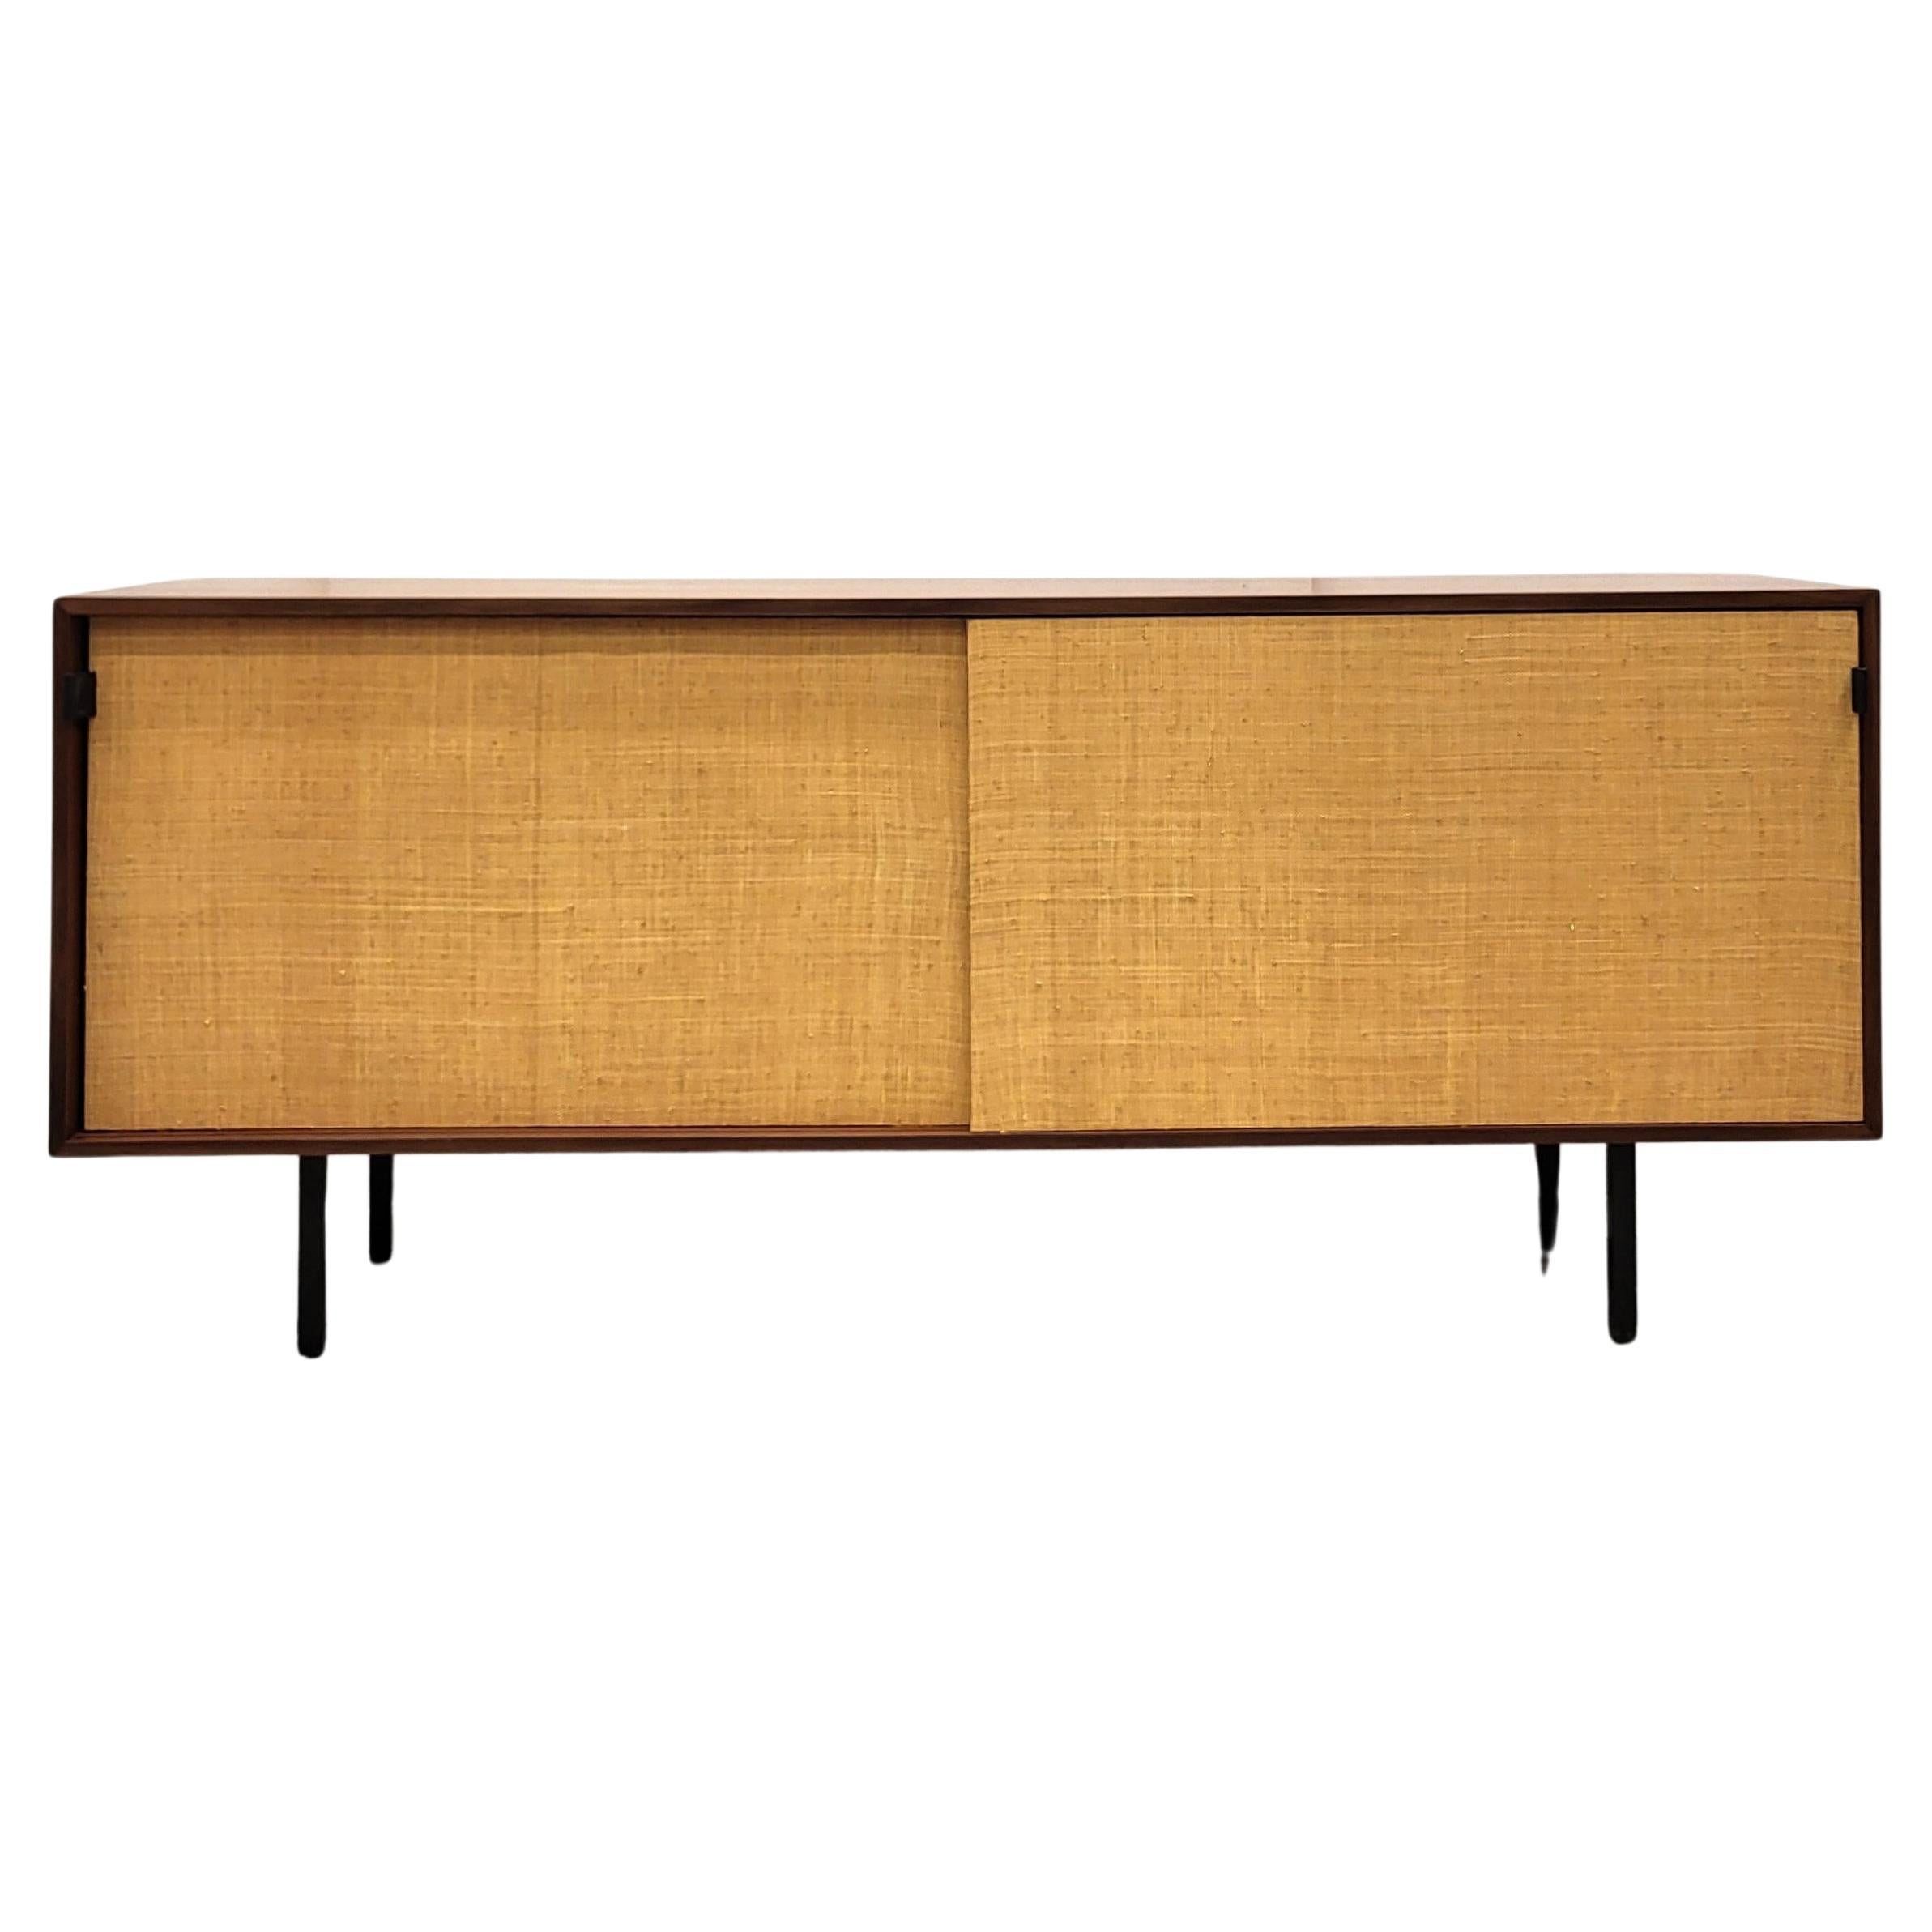 Florence Knoll Seagrass Sideboard Model 116 by Knoll, 1952